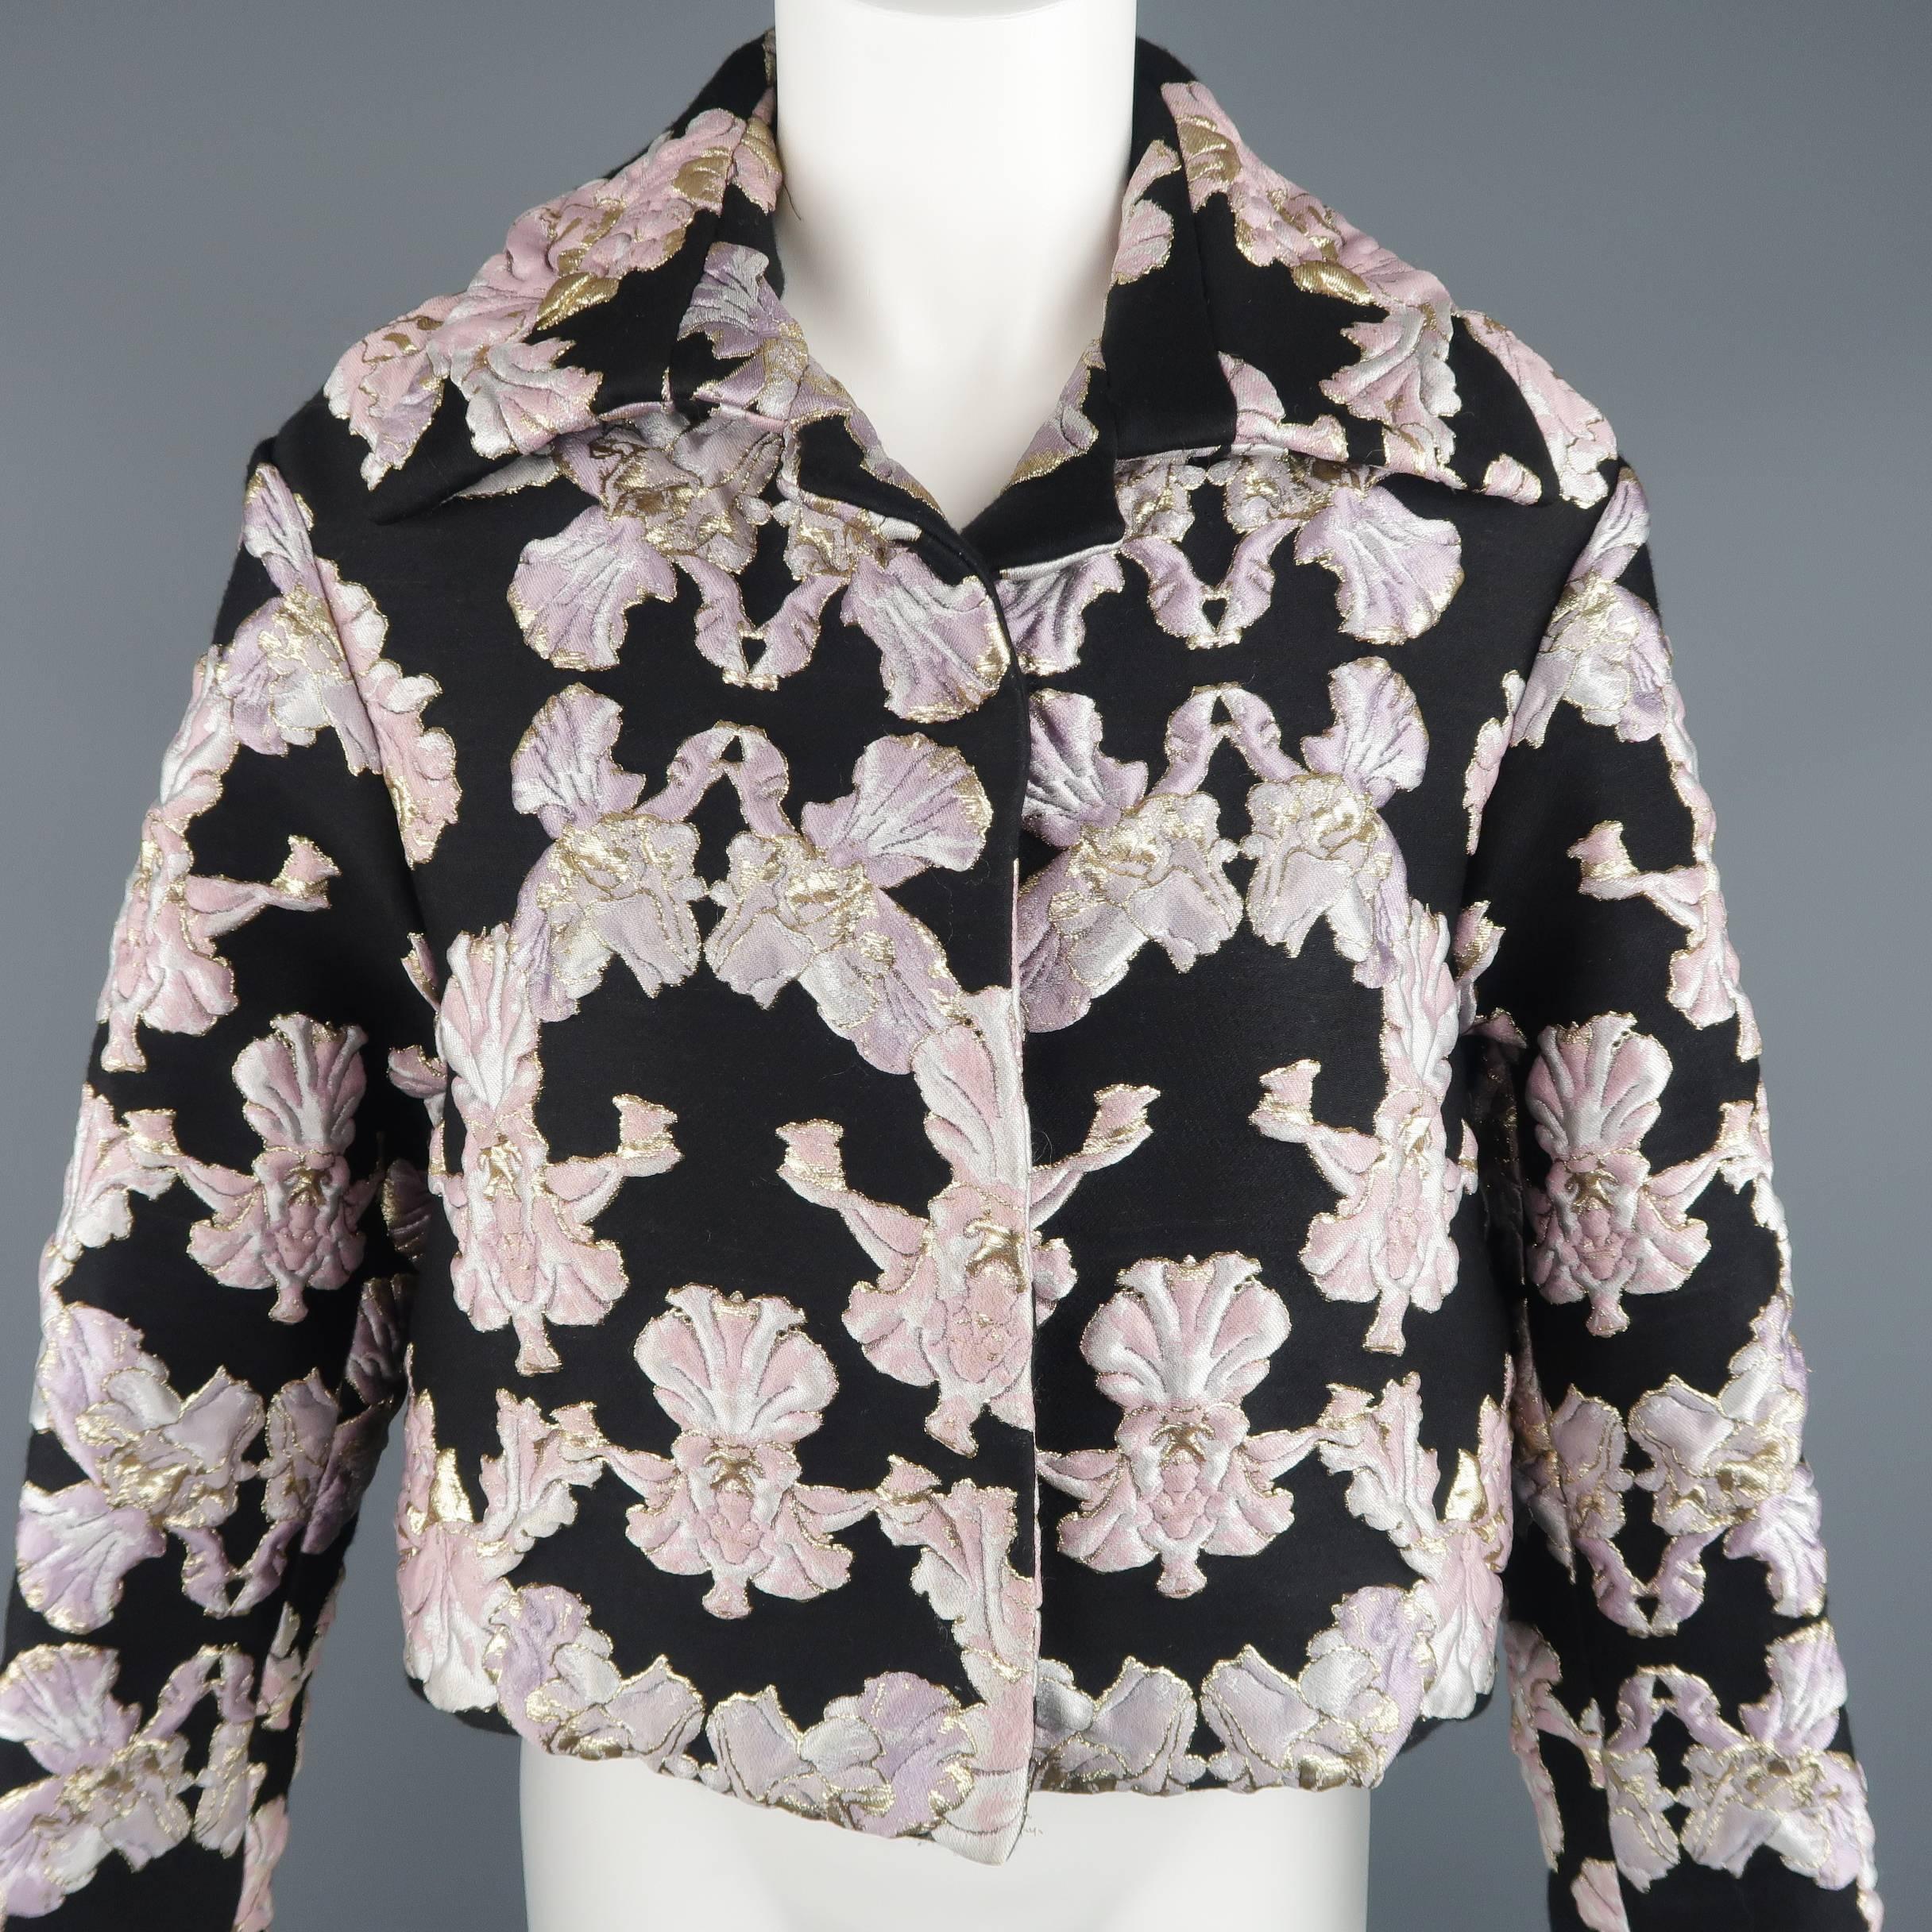 FRANCESCO SCOGNAMIGLIO cropped jacket comes in a structured black and pink textured brocade fabric with metallic gold, symmetrical orchid print throughout and features a wide spread collar, hidden snap closure, and oversized silhouette. Spring 2016